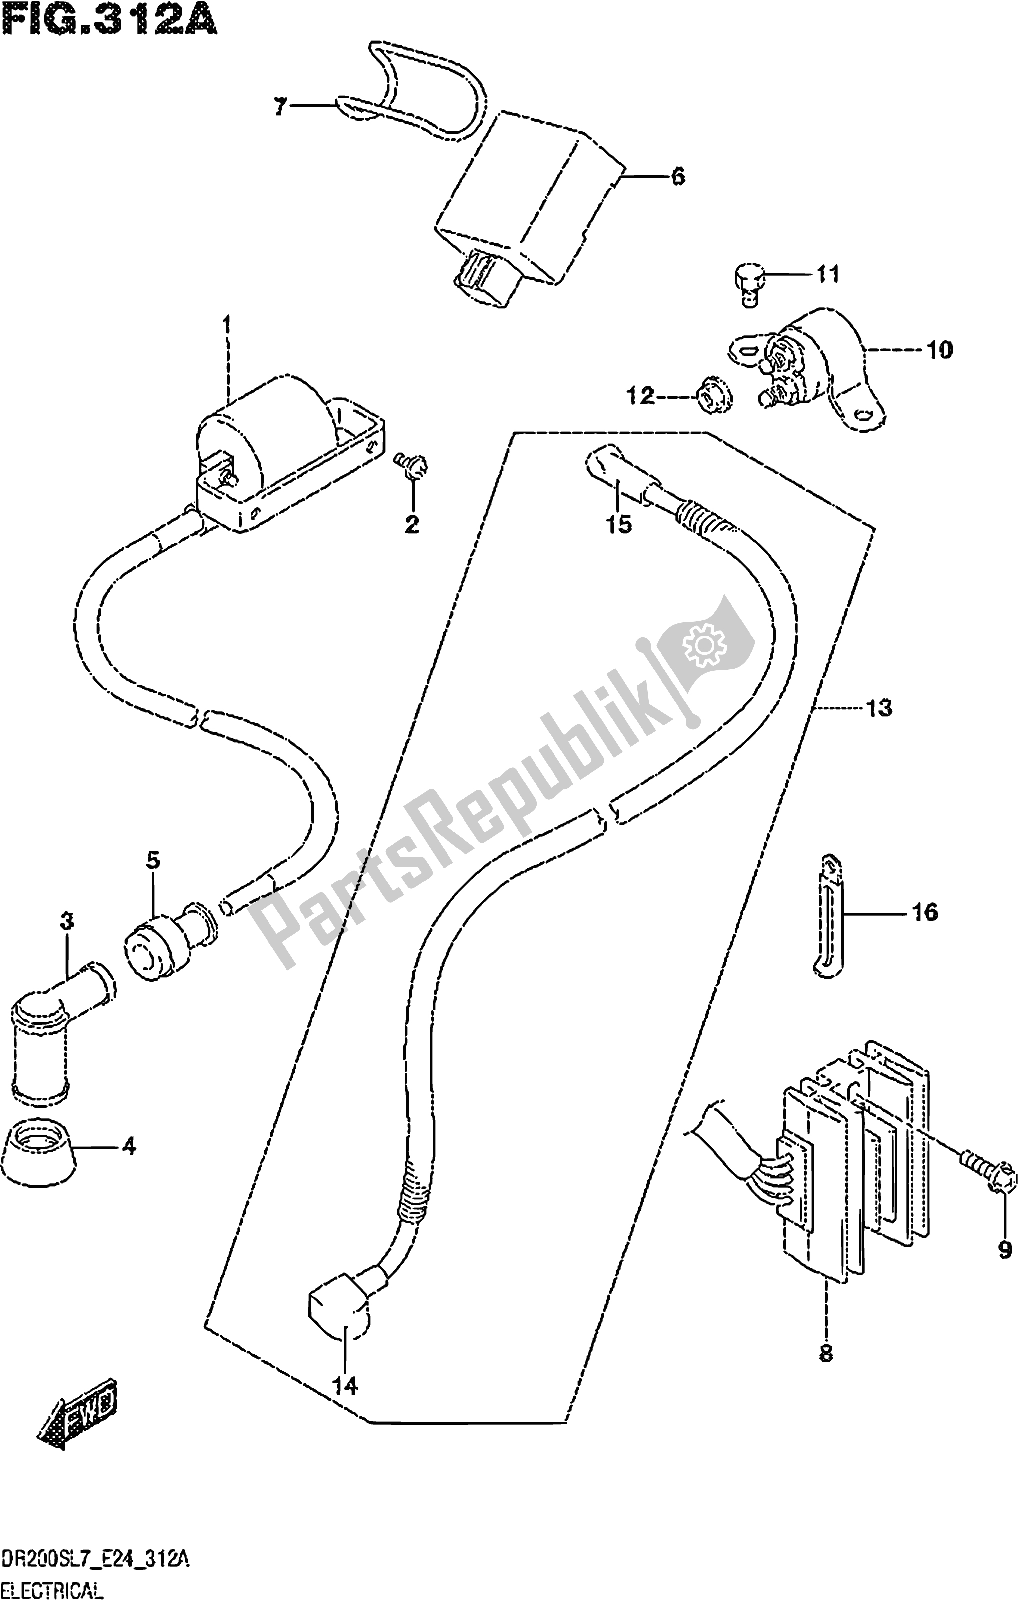 All parts for the Fig. 312a Electrical of the Suzuki DR 200S 2017